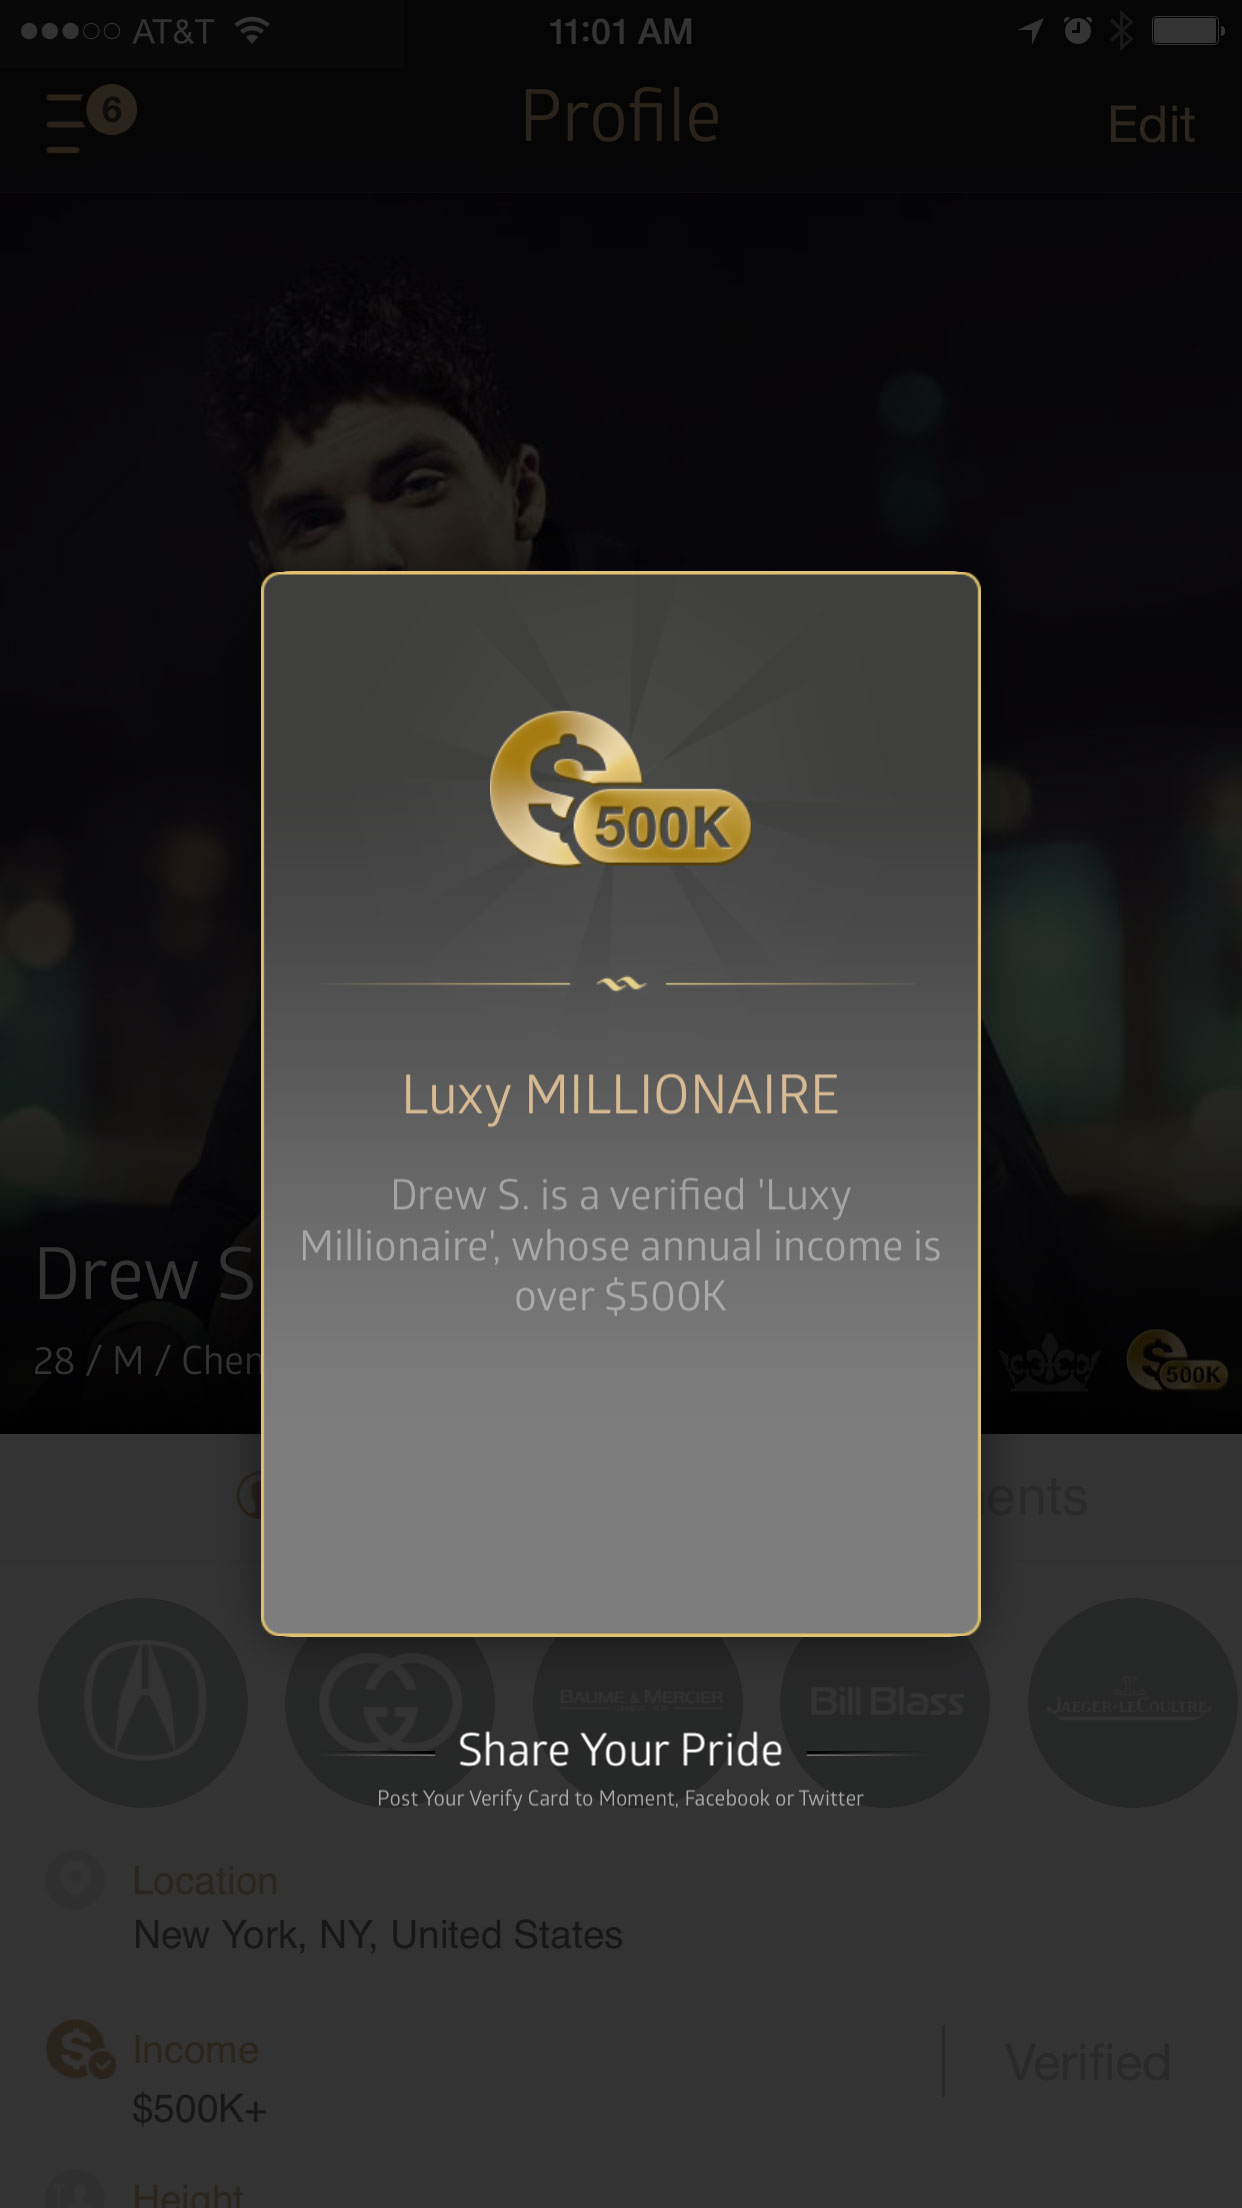 How to date a millionaire